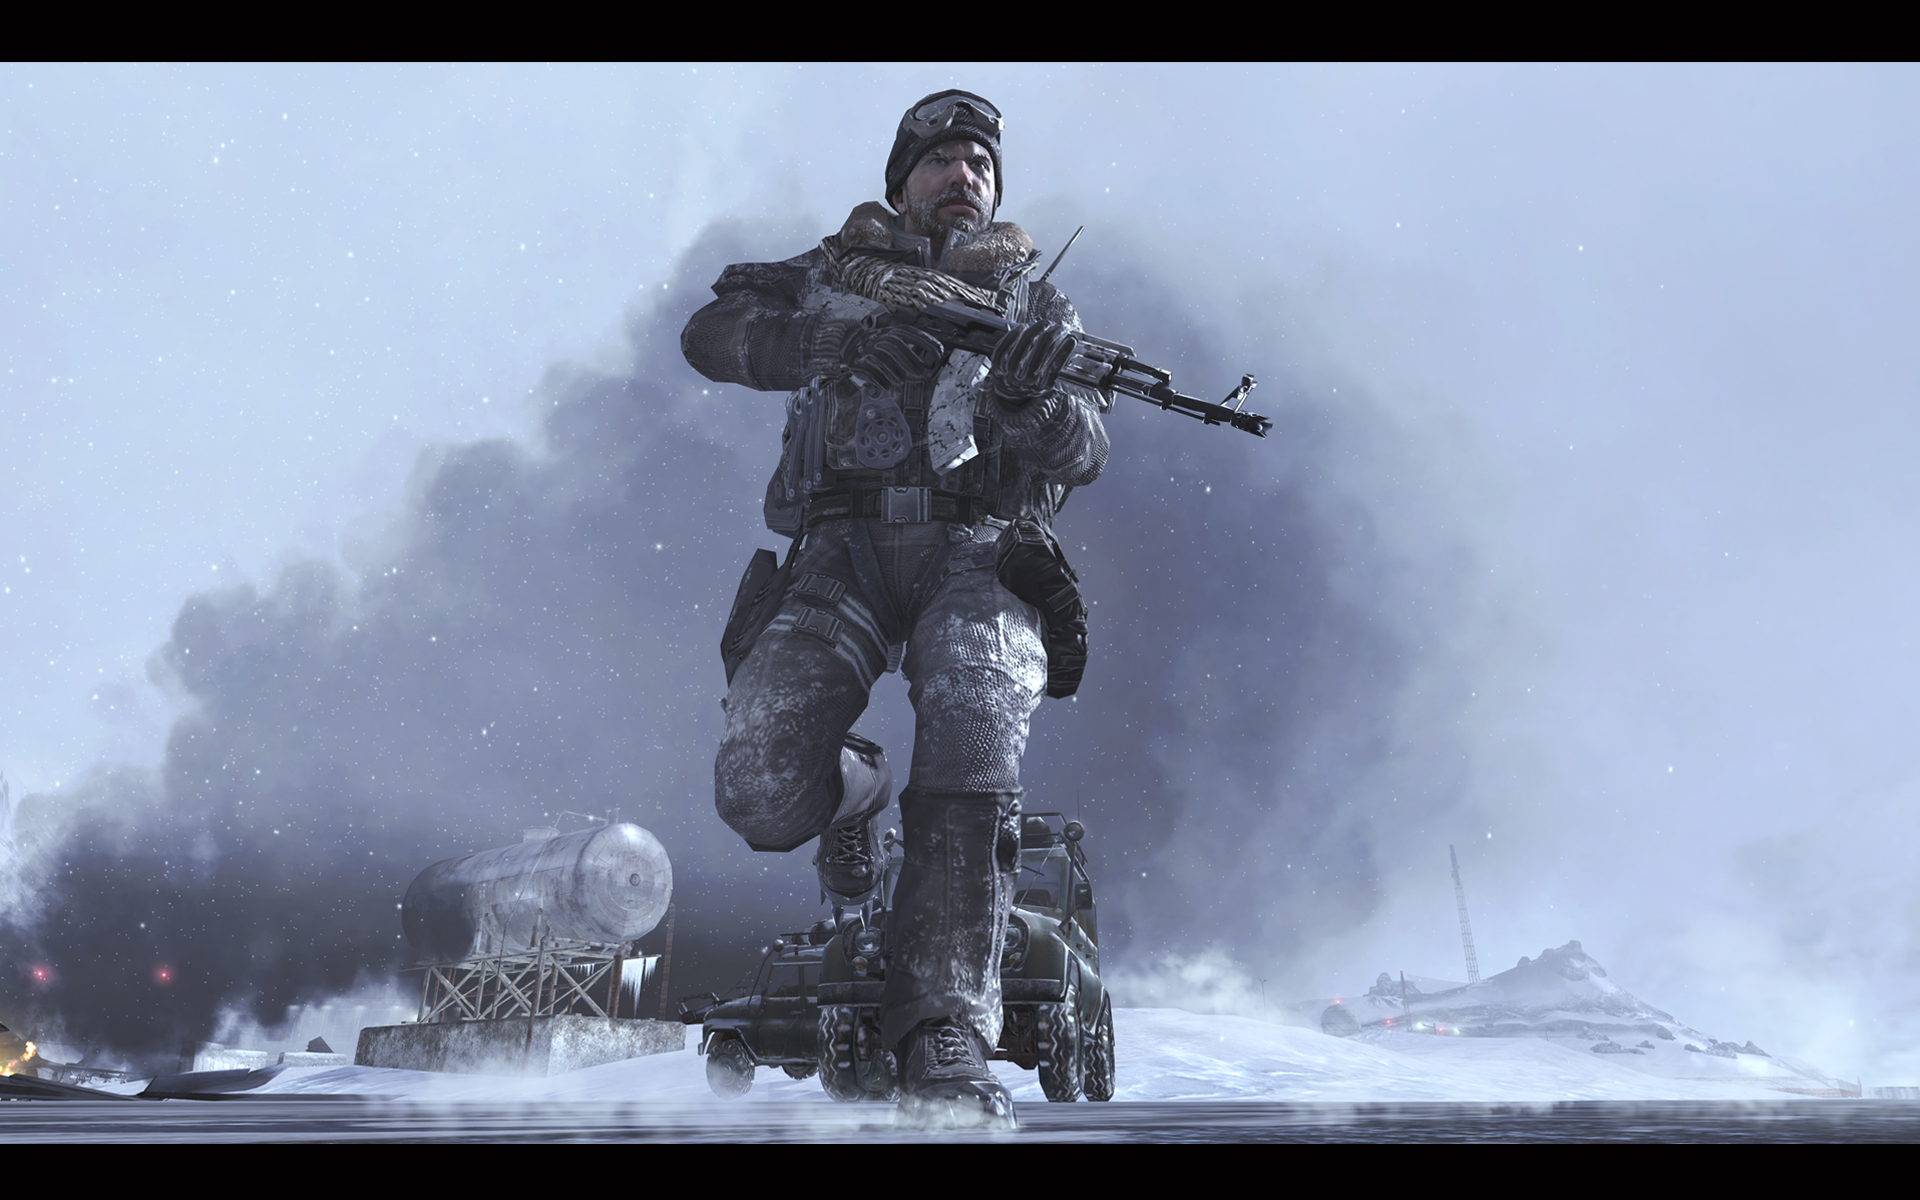 mw2 wallpaper,action adventure game,pc game,screenshot,games,soldier